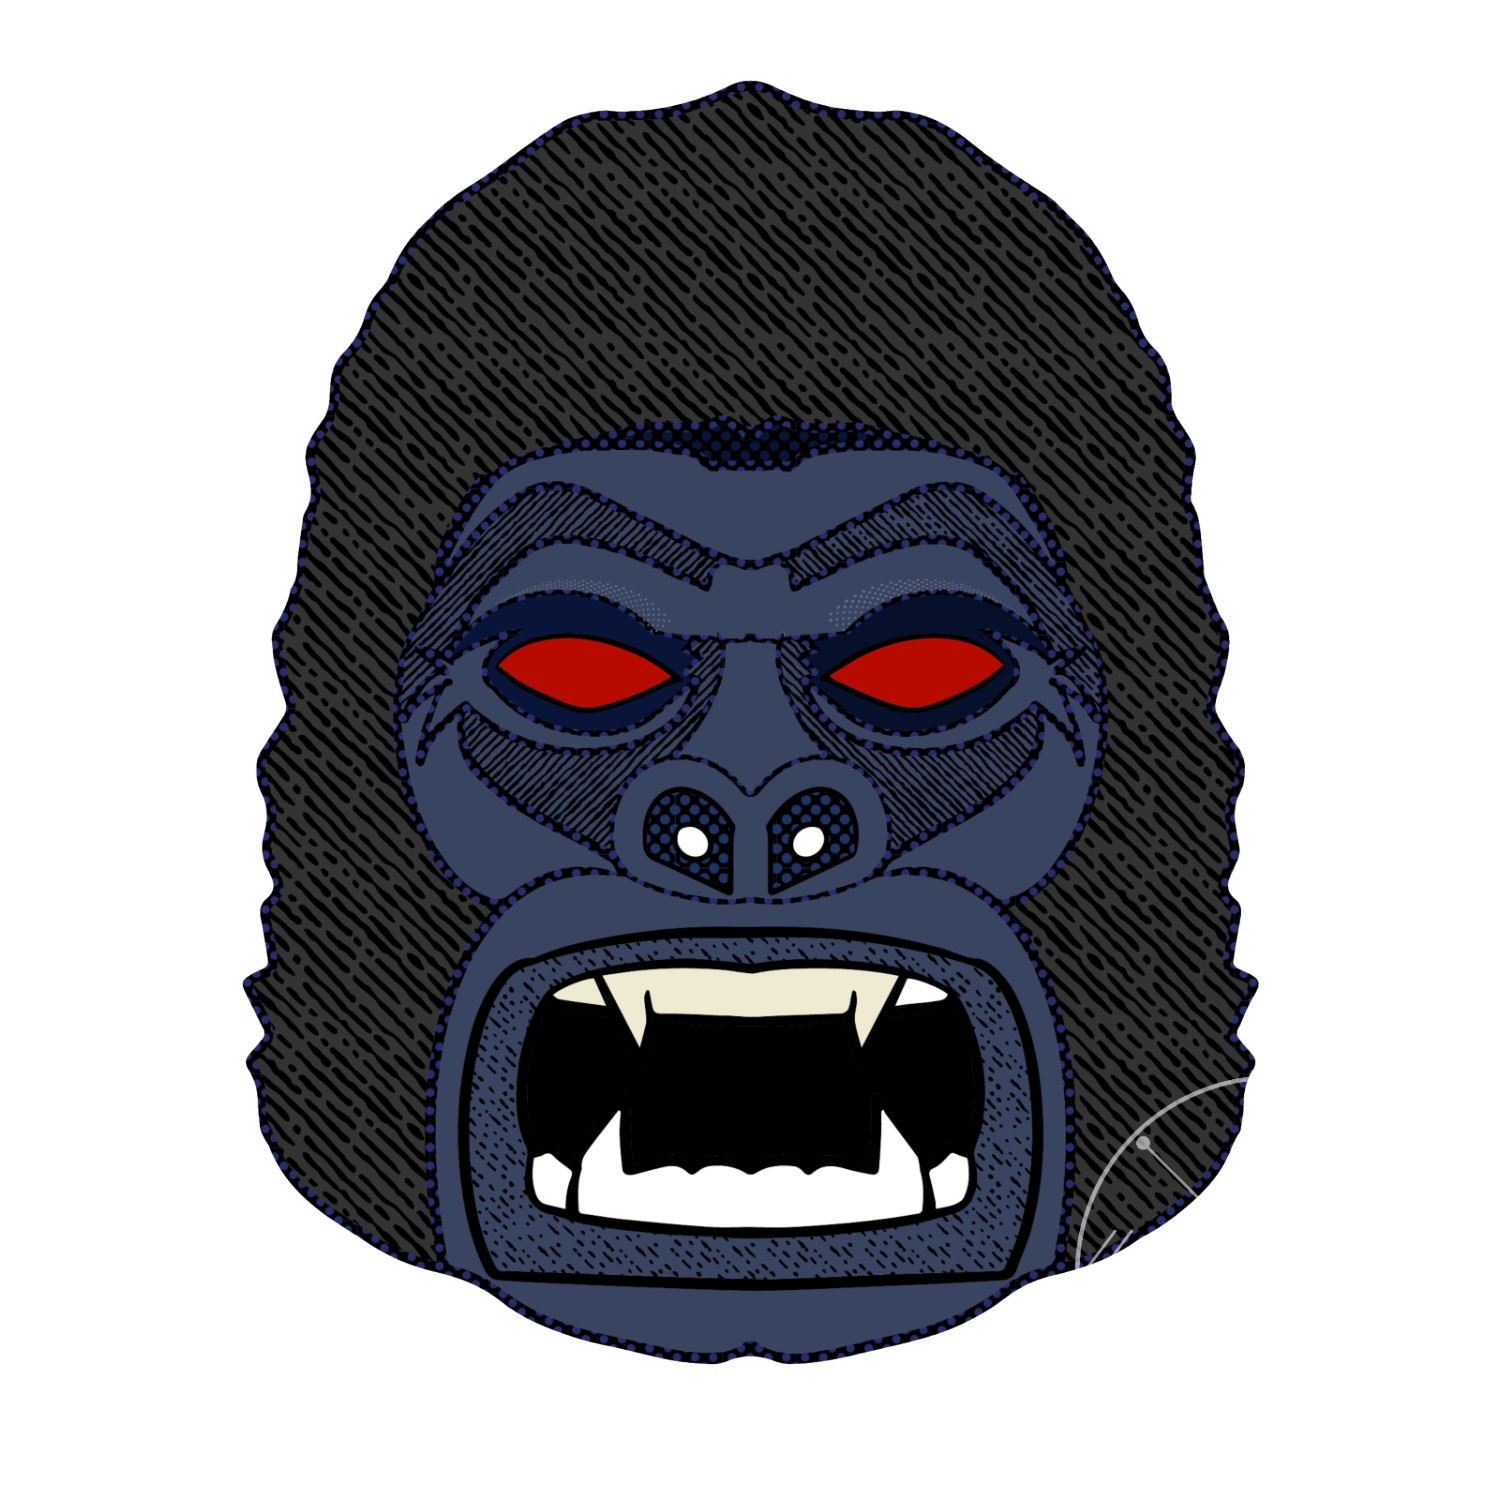 monkykong.png